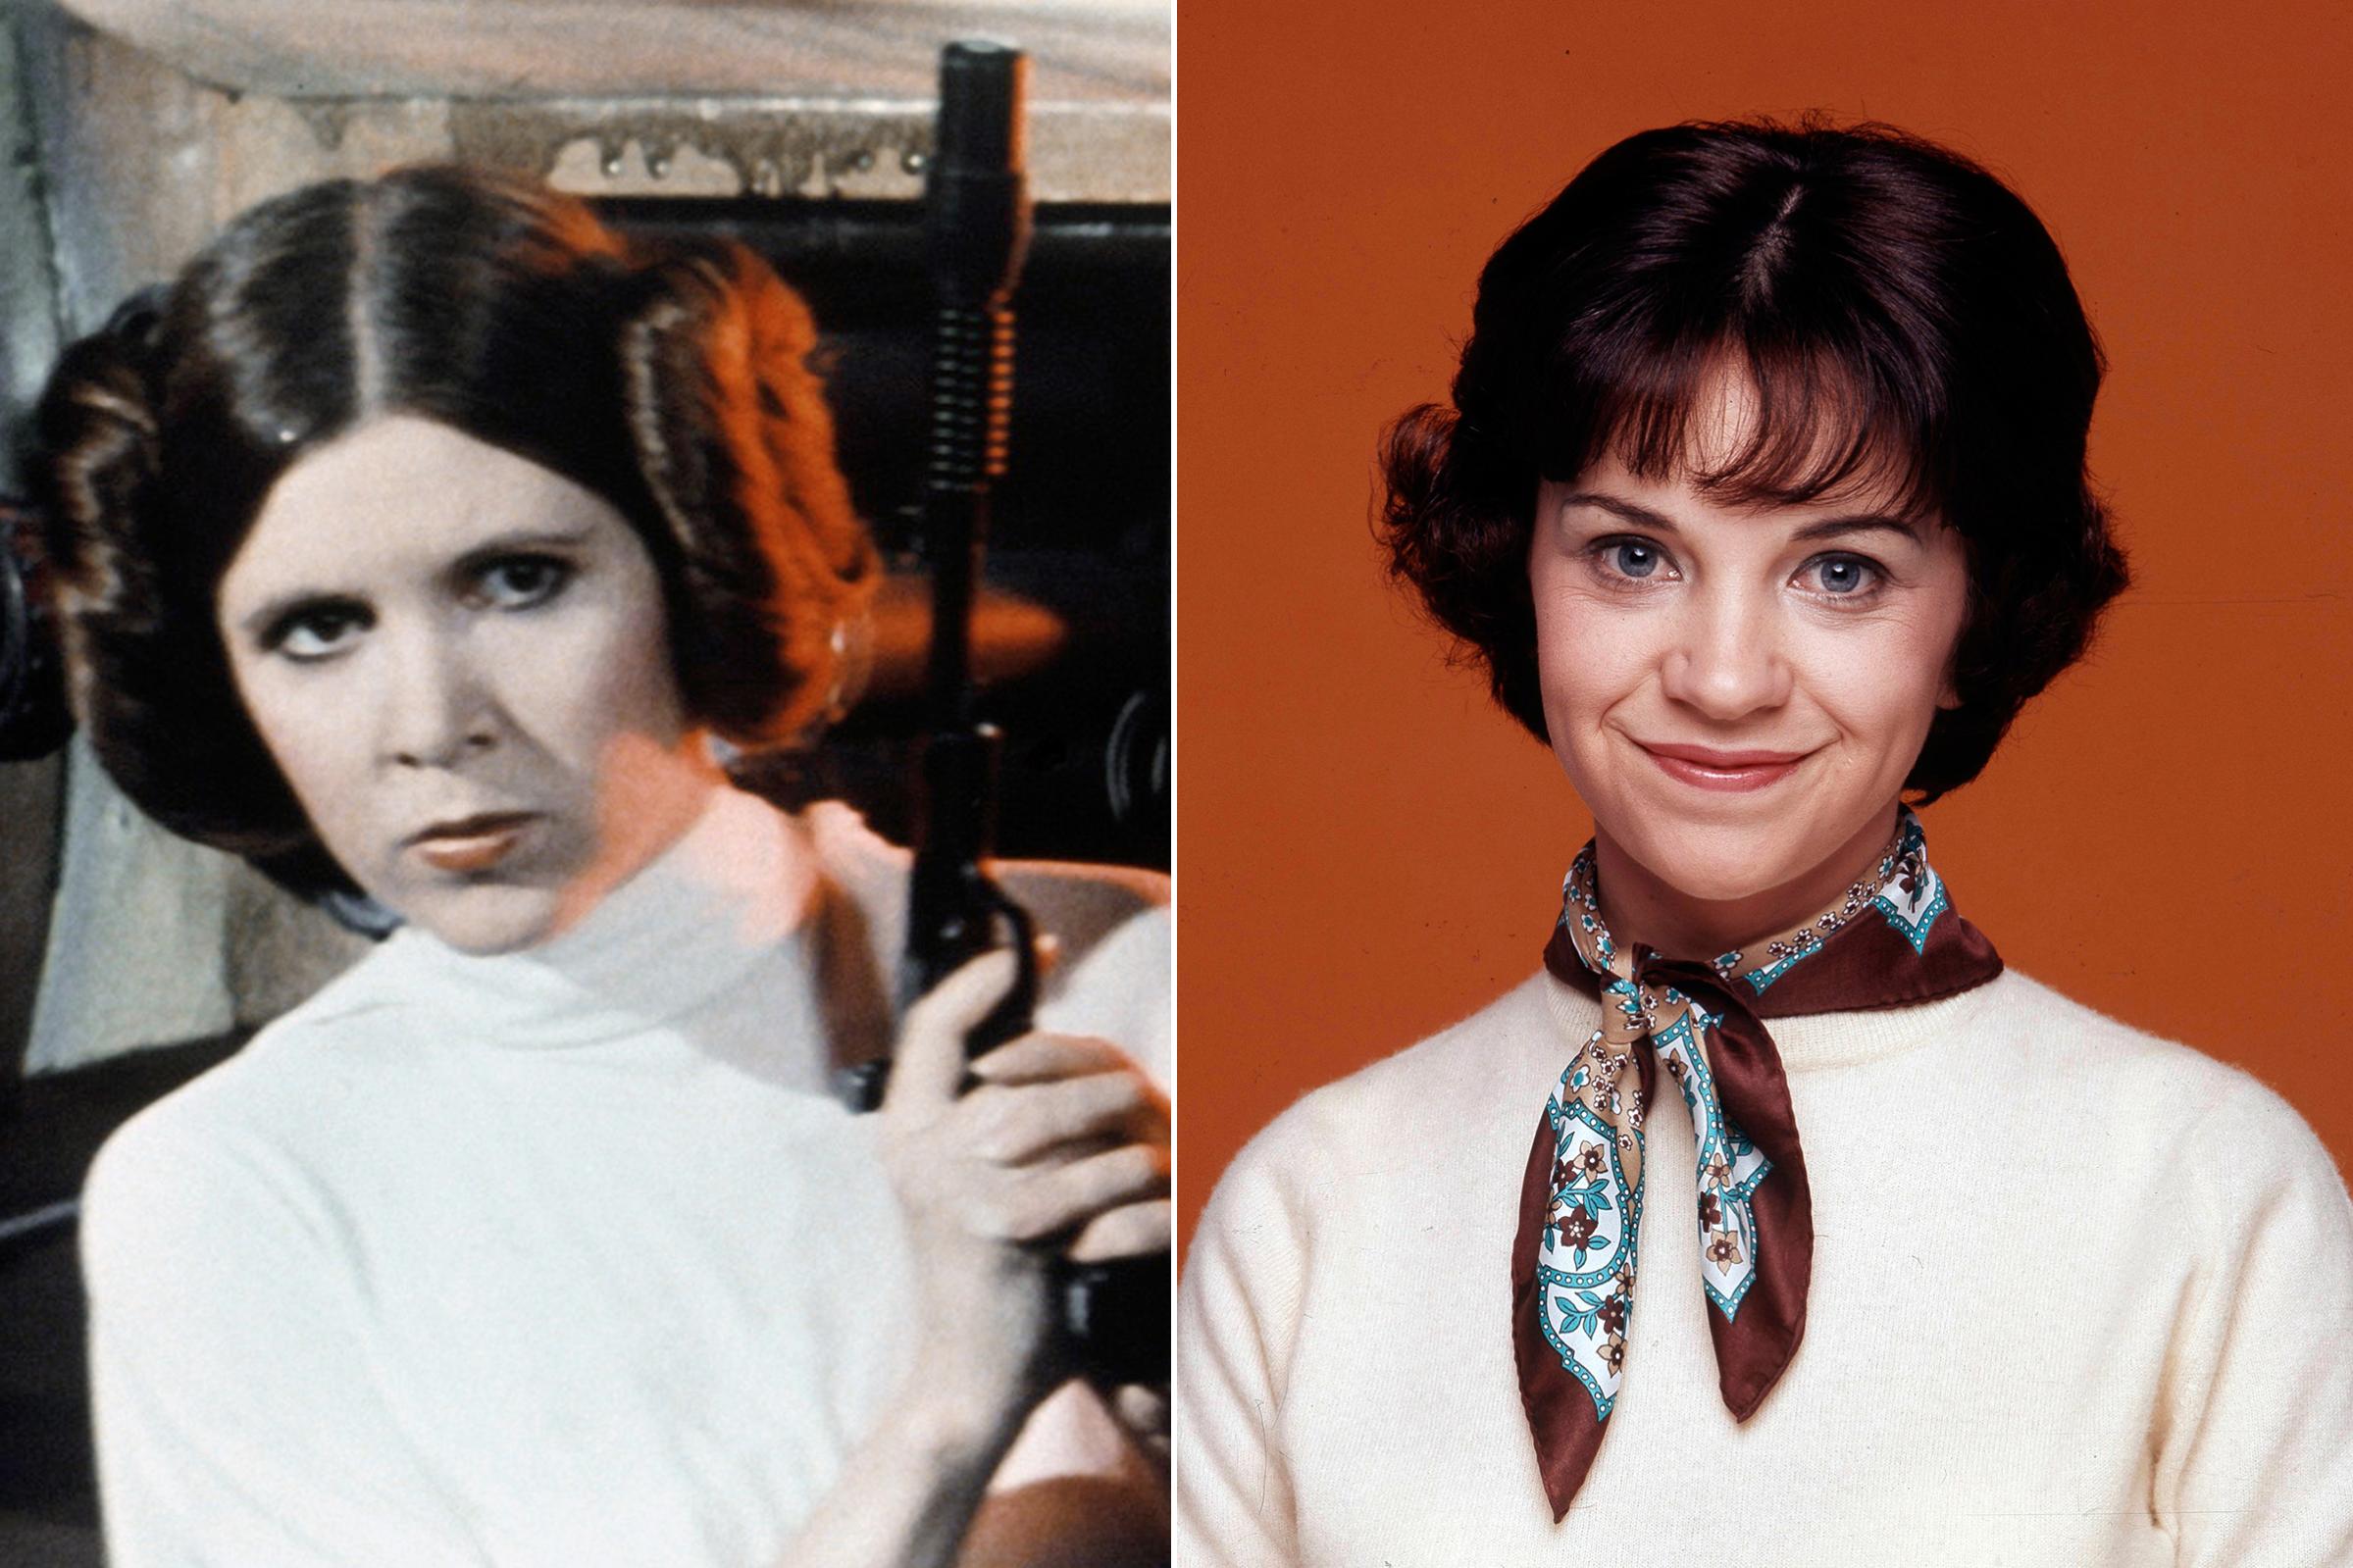 Cindy Williams was almost cast as Princess Leia in Star Wars